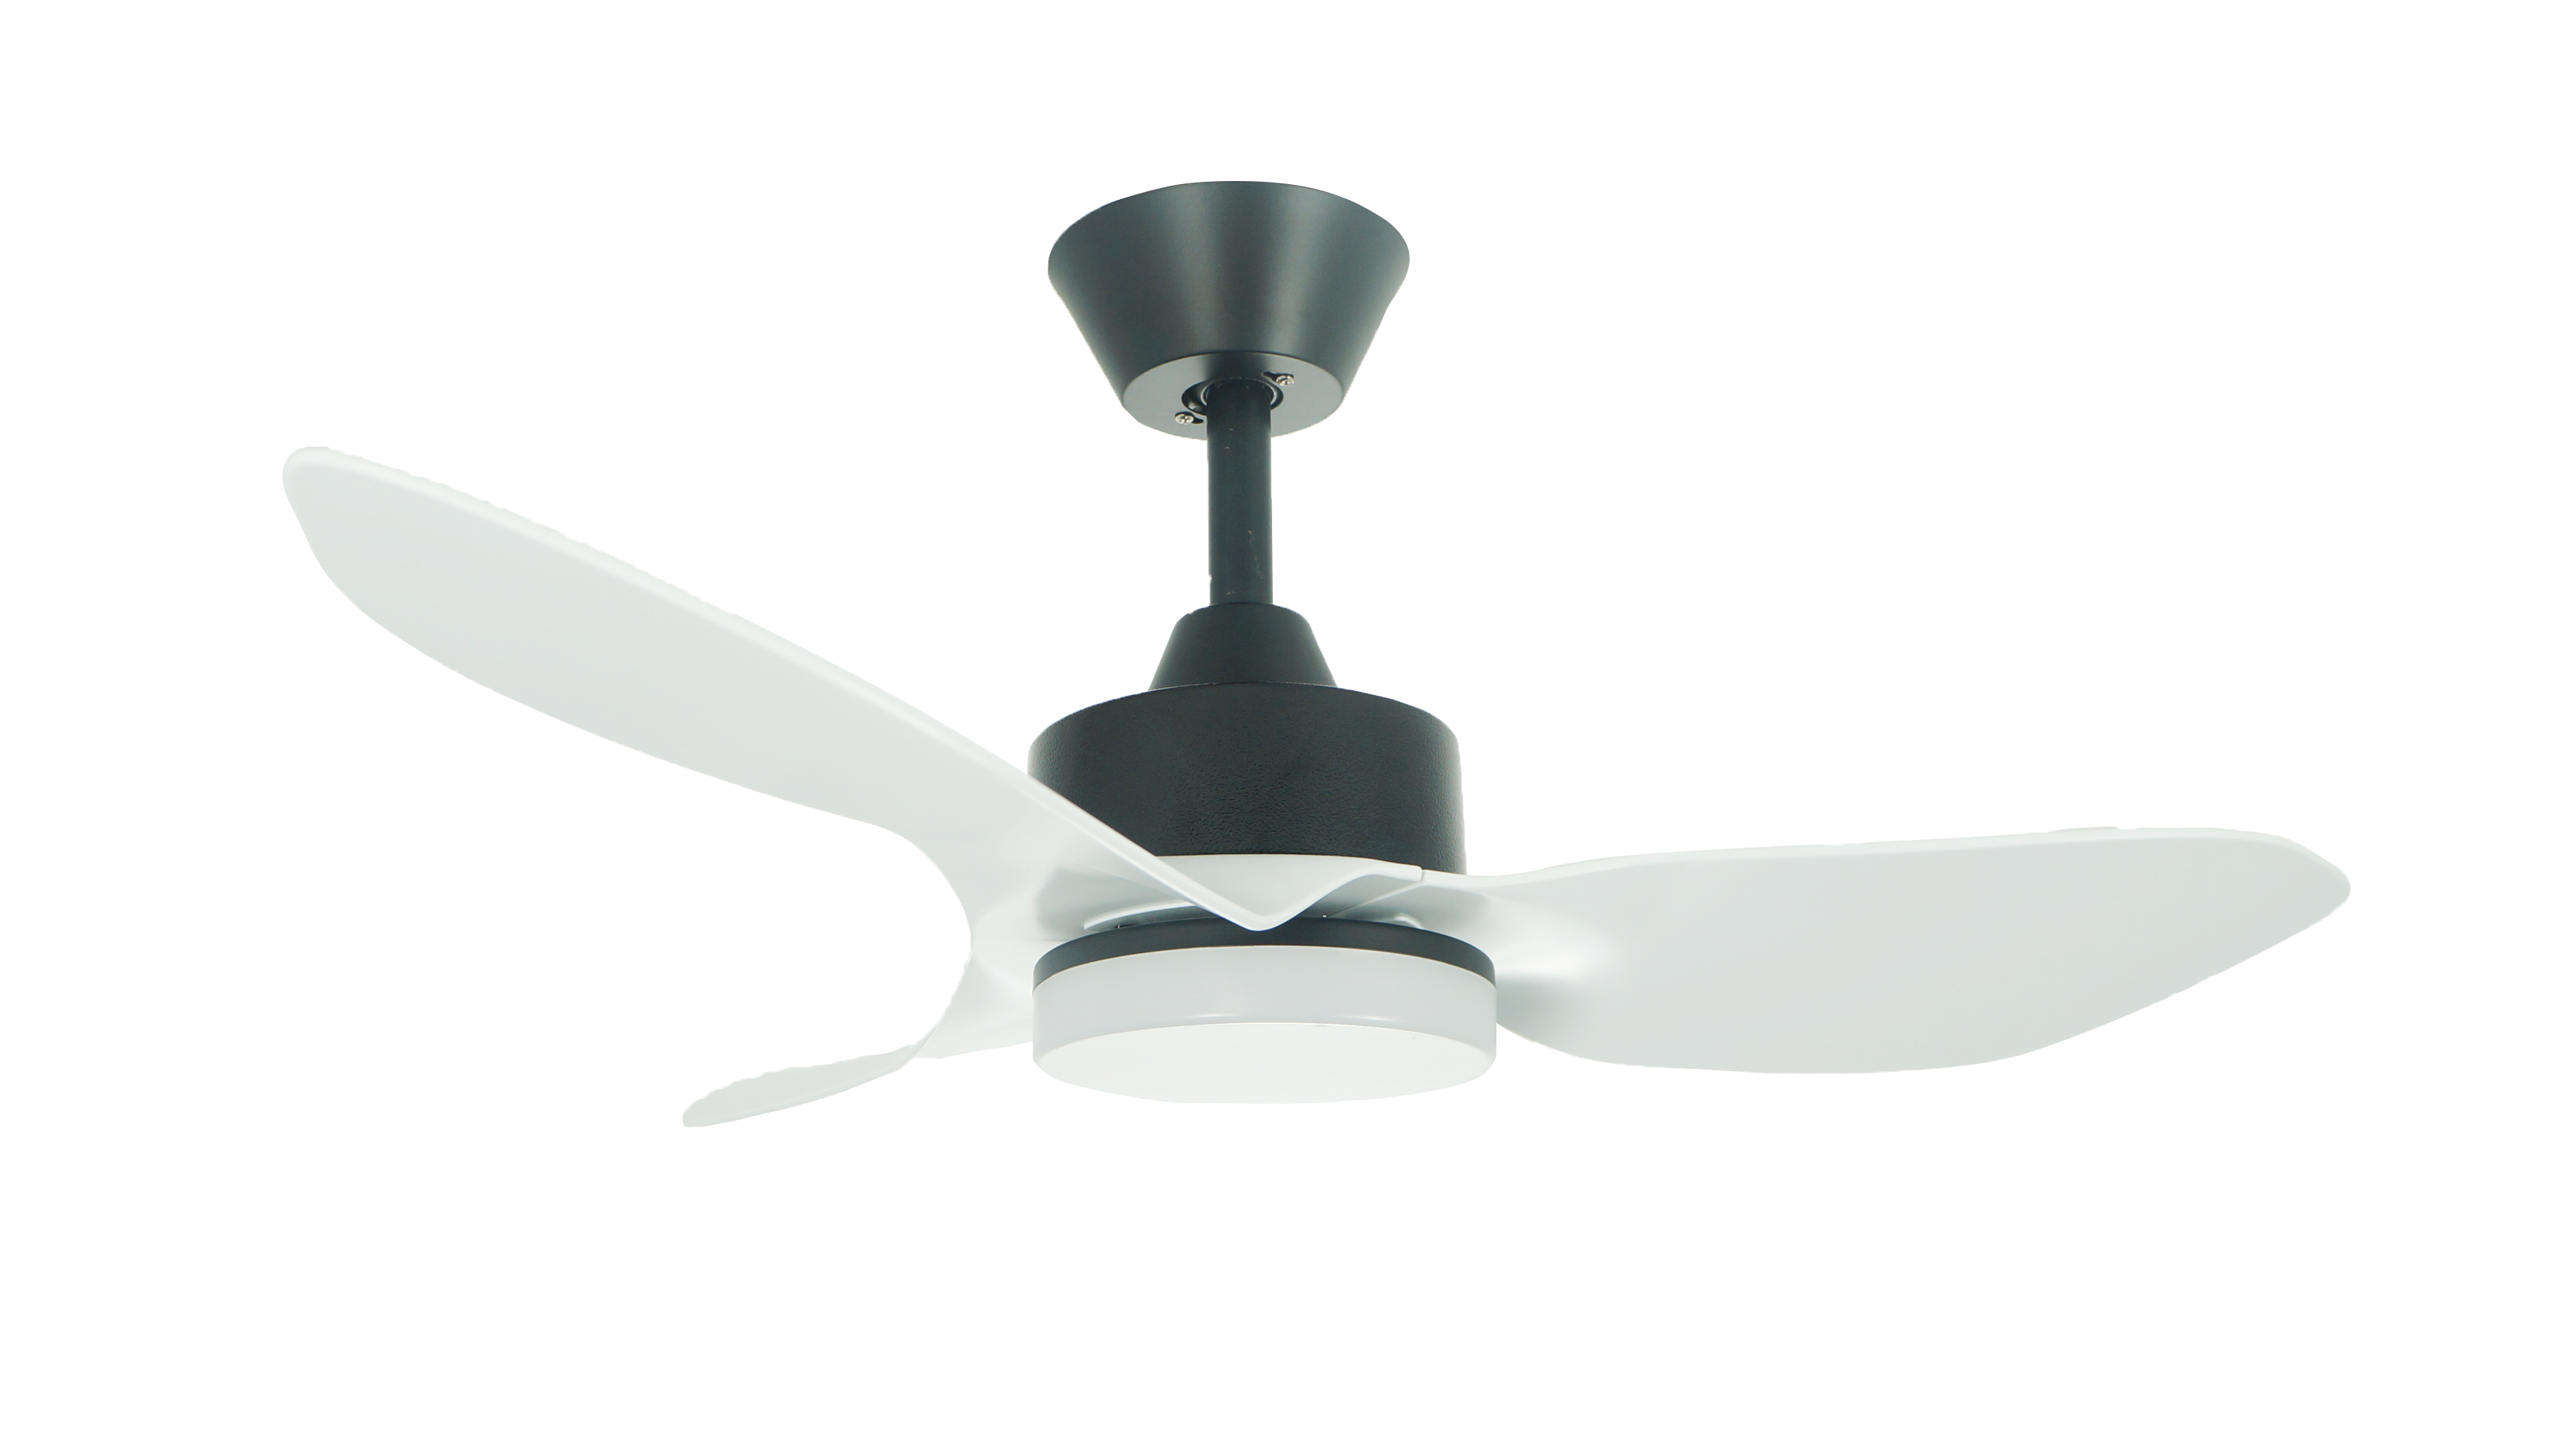 Airbena Ceiling Fan 36"ABS Fan Blade with And without Light for Household Ceiling Fans